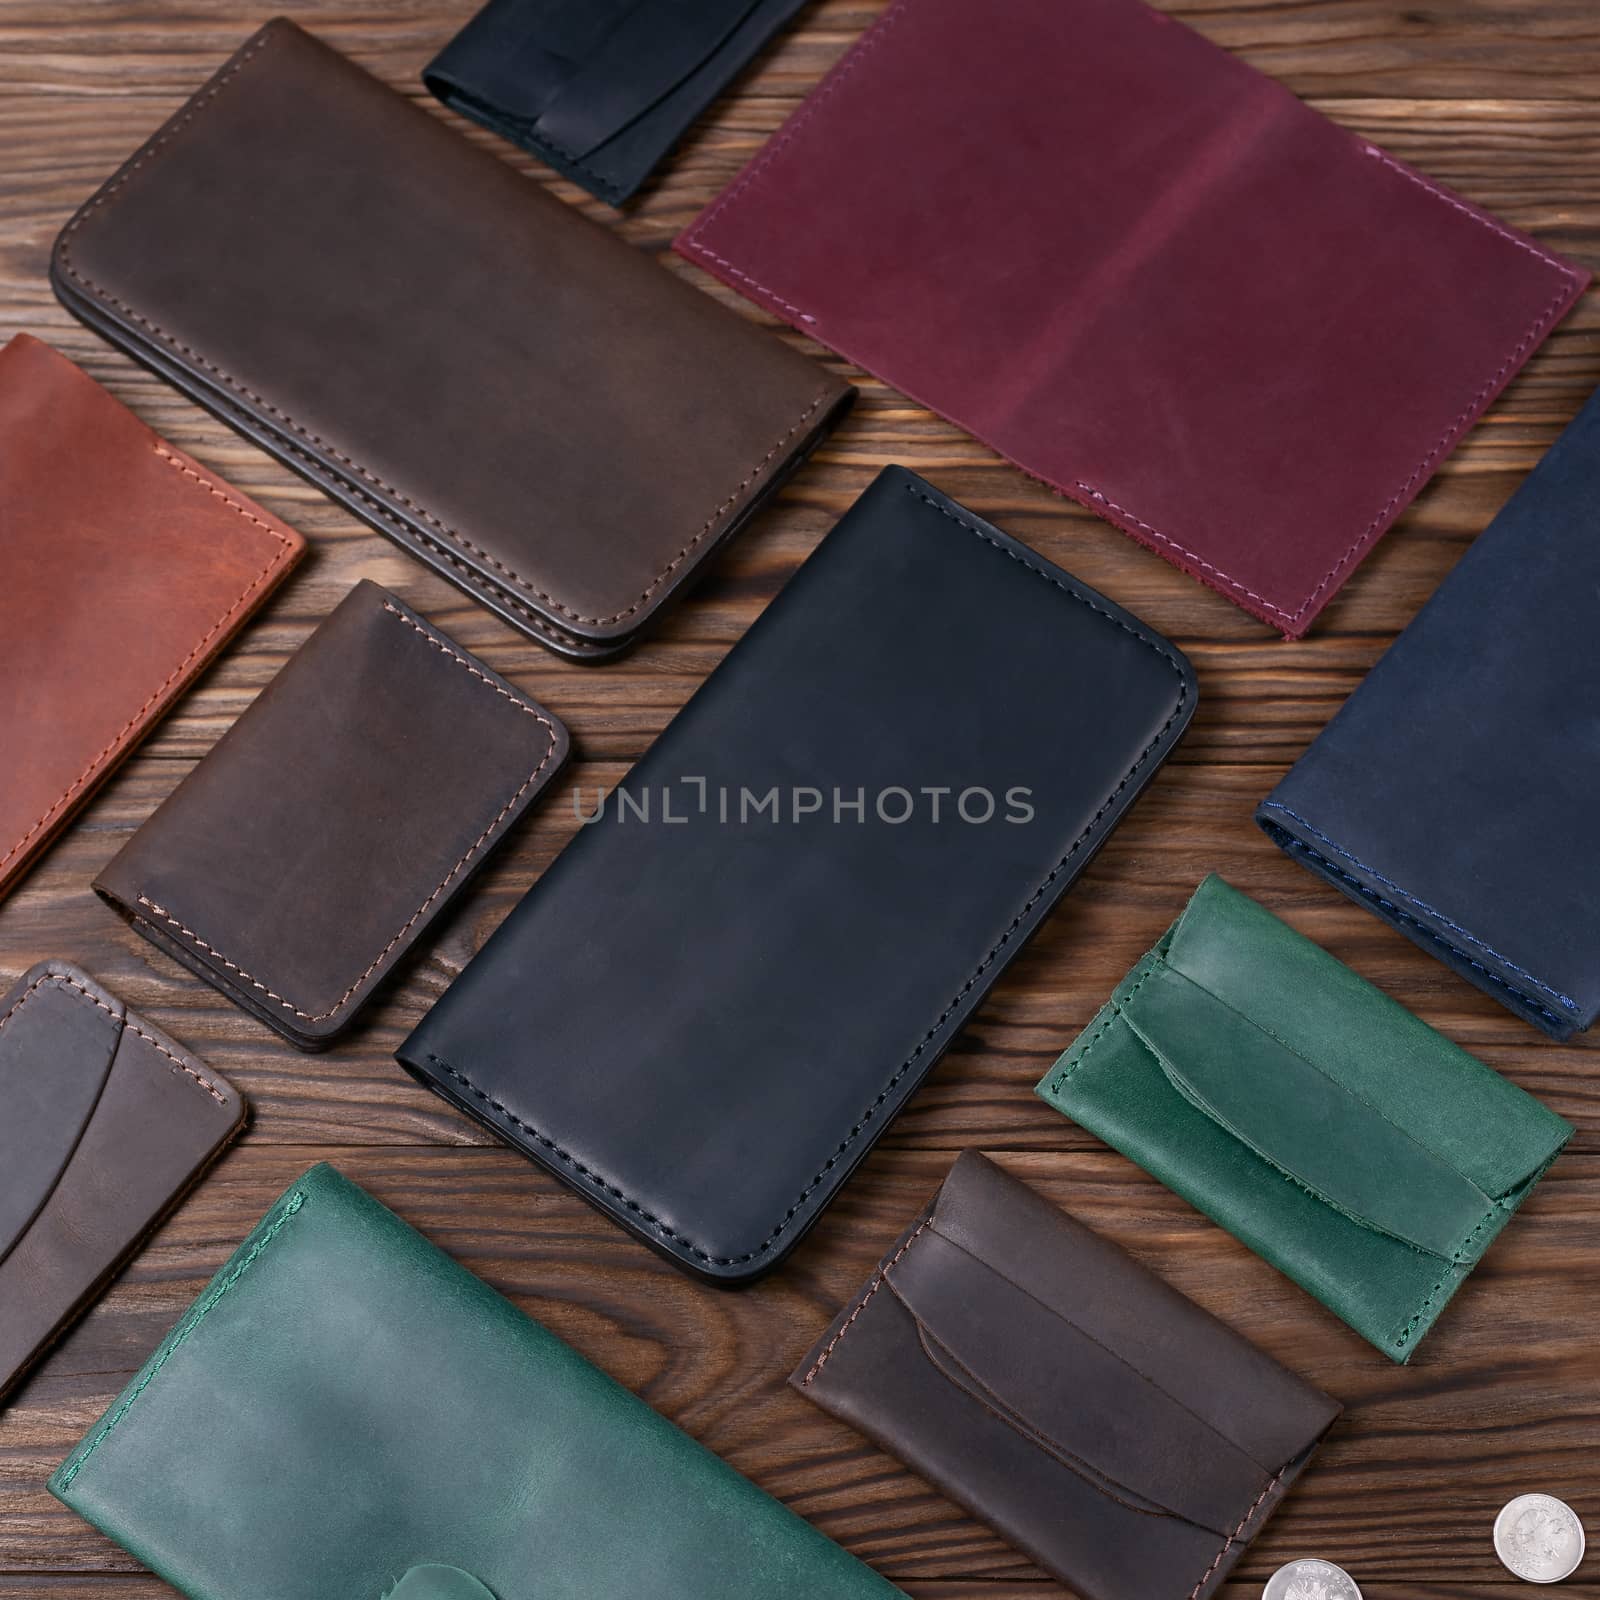 Black color handmade leather porte-monnaie surrounded by other leather accessories on wooden textured background. Side view. Stock photo of luxury accessories. by alexsdriver